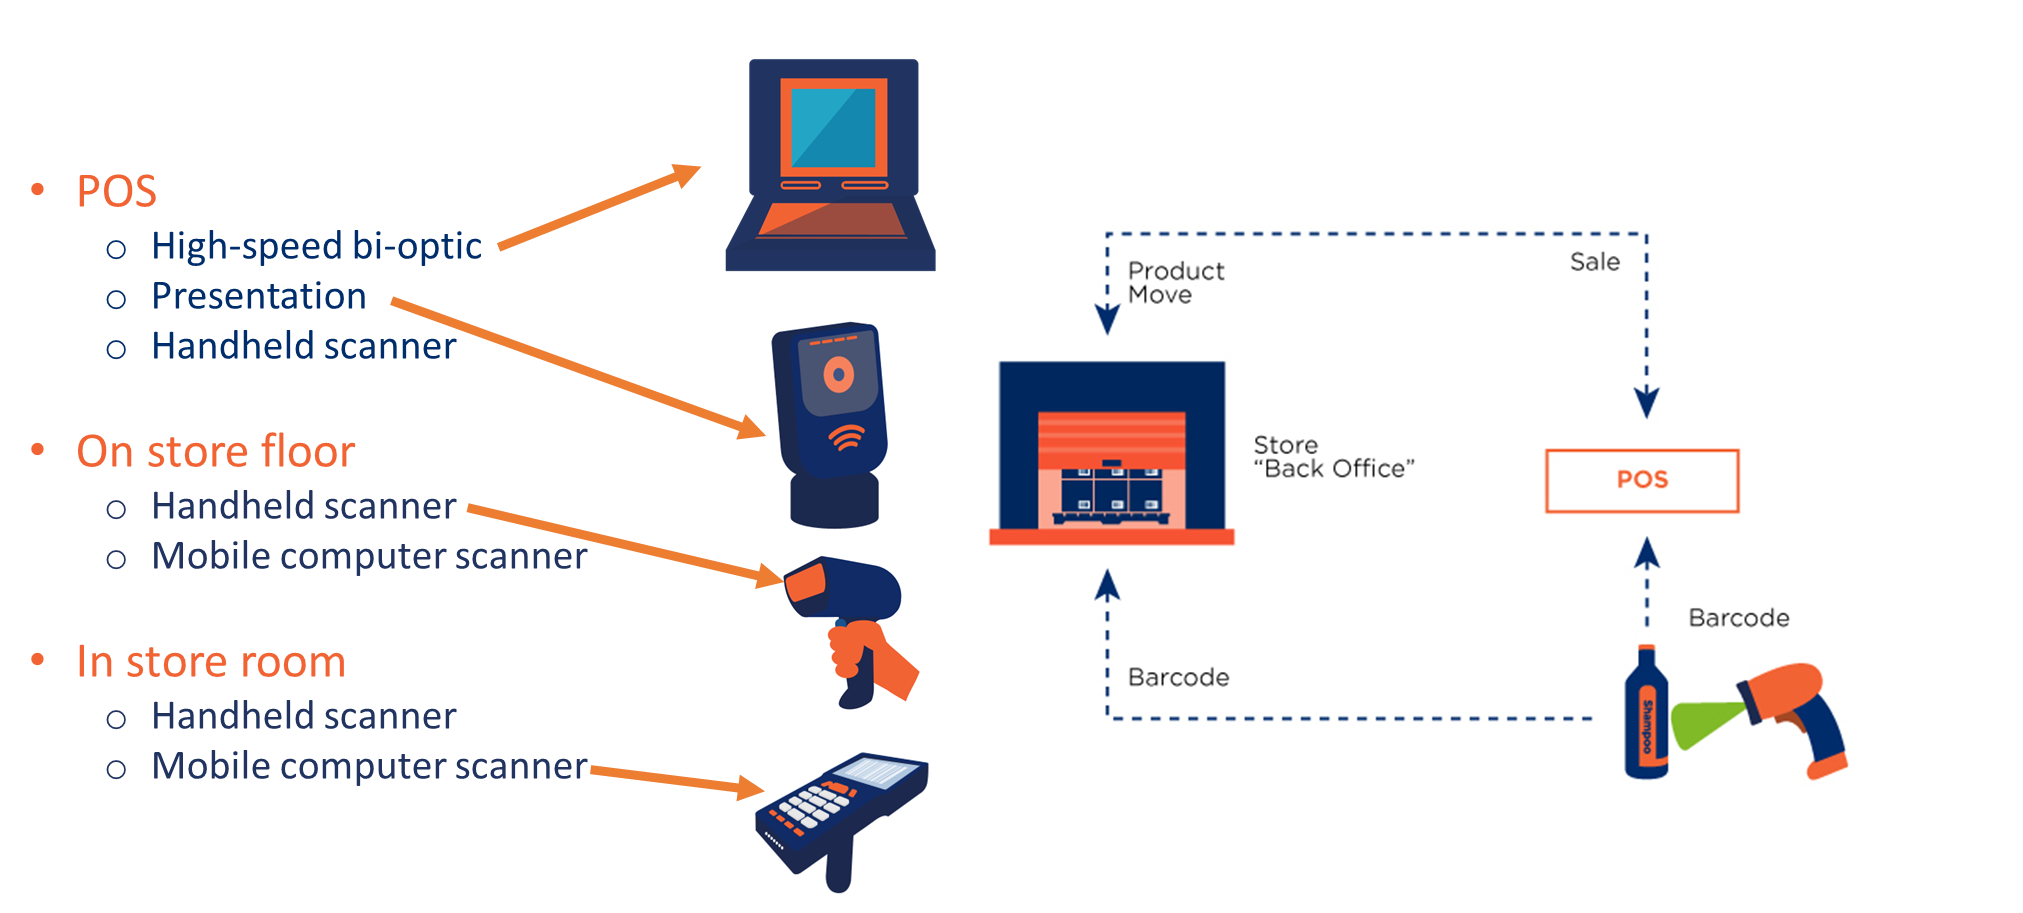 A diagram showing different stype sof scanner: a high-speed bioptic, presentation and handheld at POS; handheld amd mobile computer on the shop floor, similar tools in the store room.